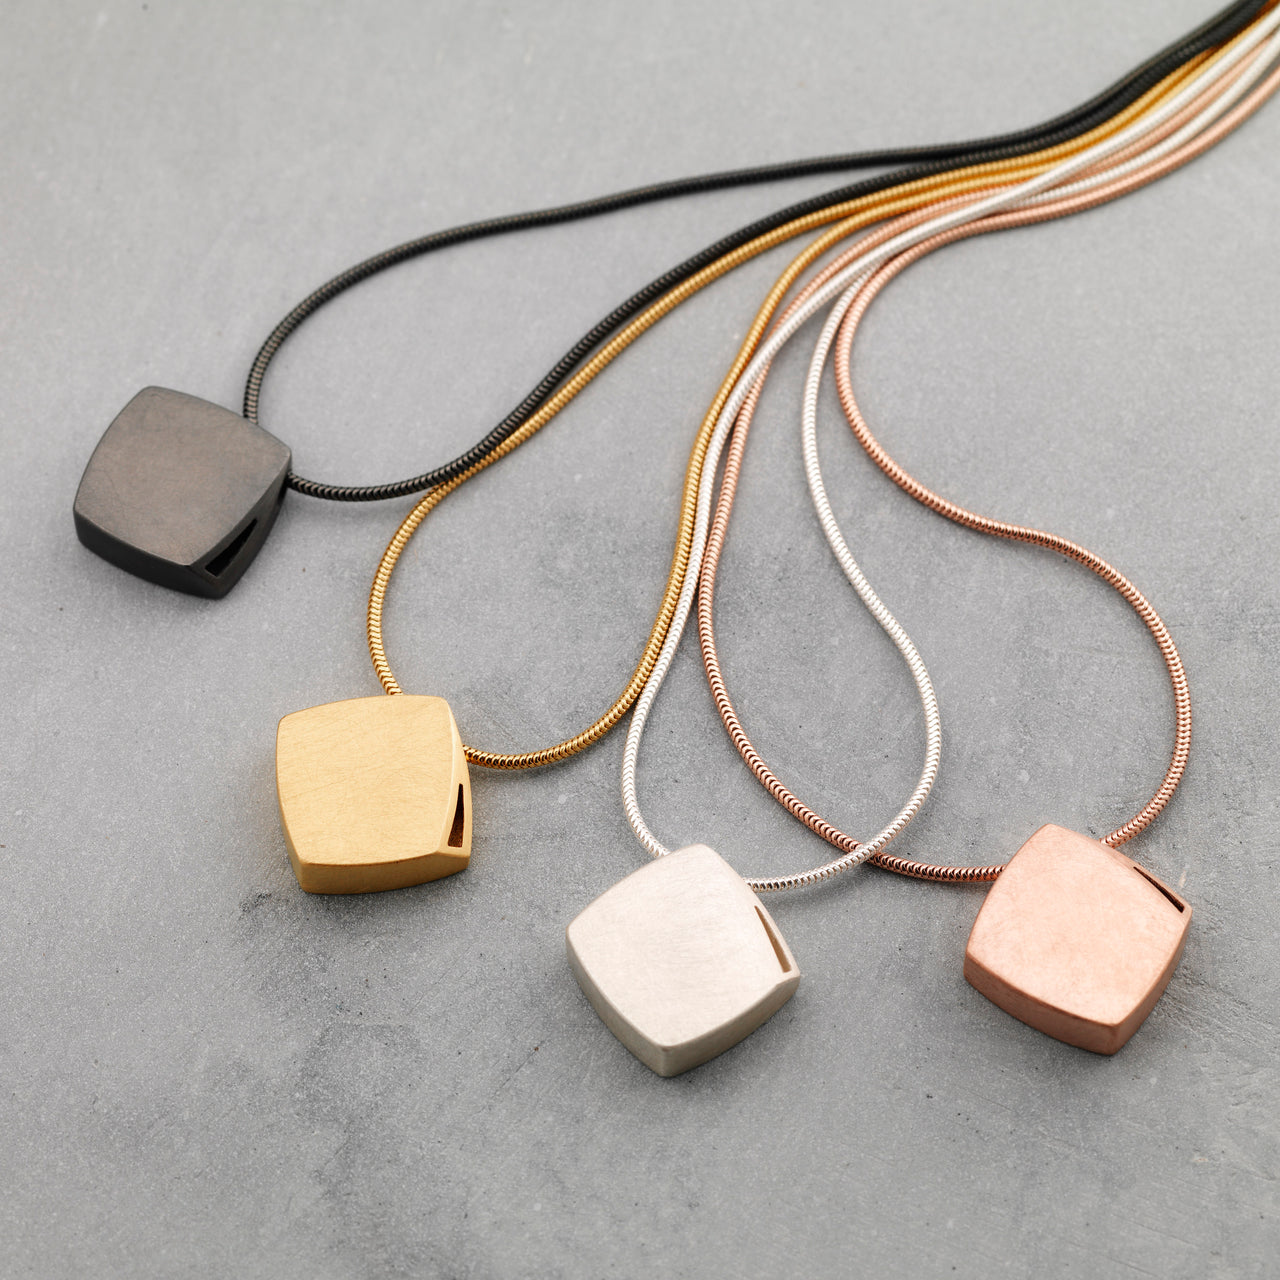 Curved Curves Rhombus Necklace Rose Gold